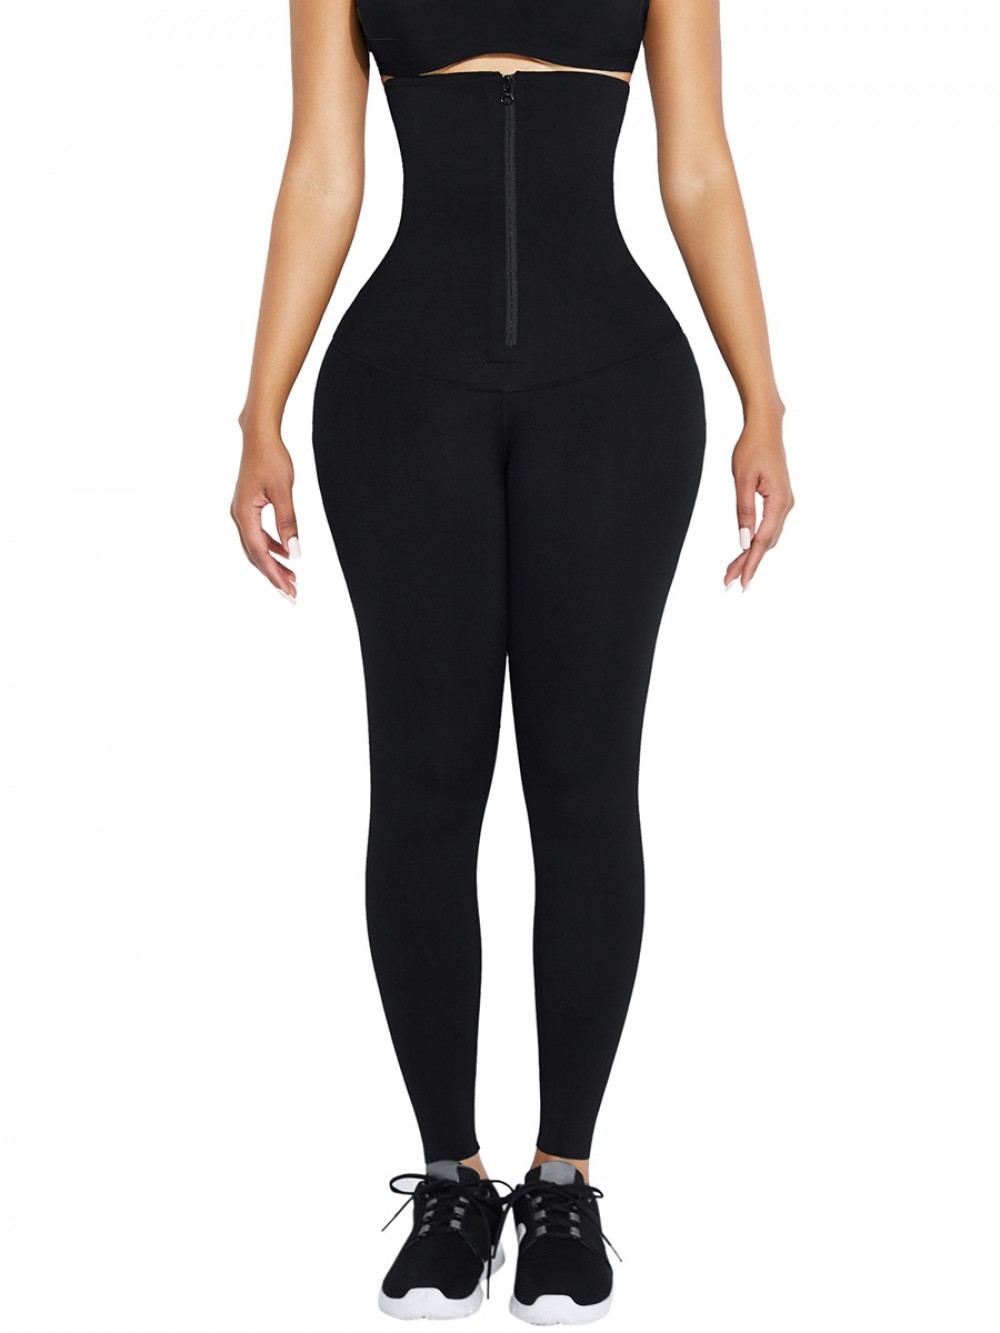 Black Waist Trainer 2-In-1 Leggings With Zipping Firm Compression